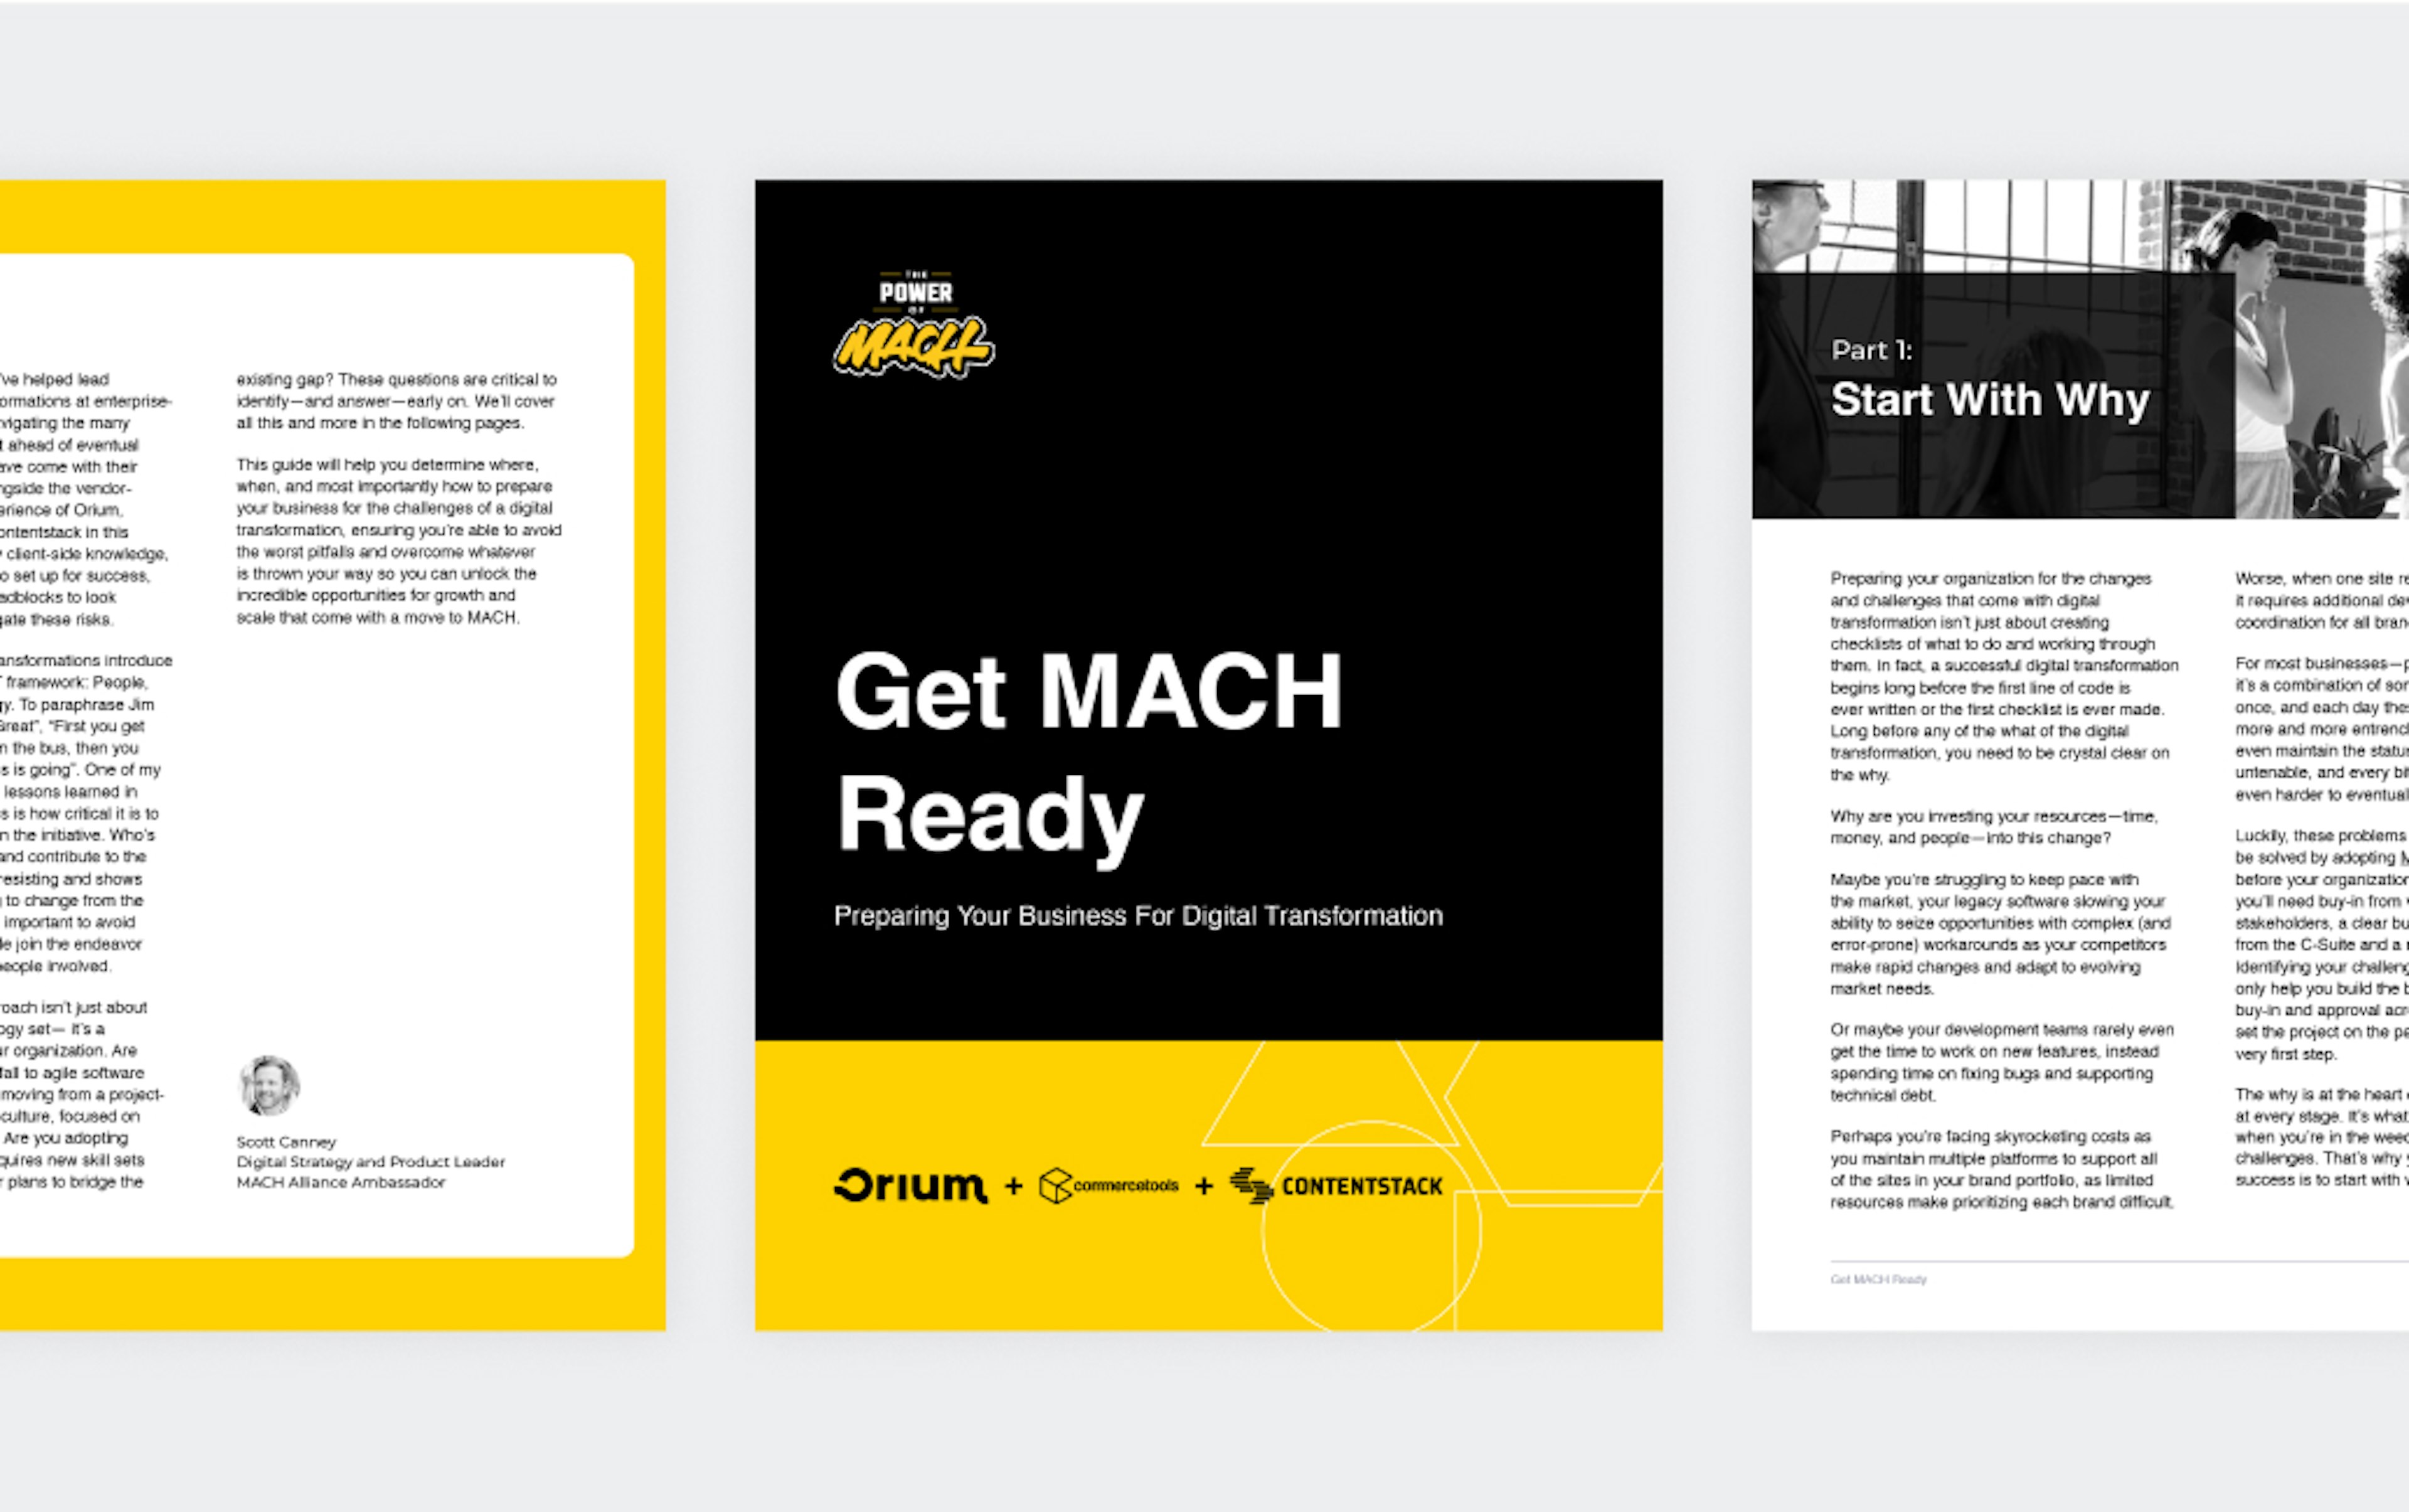 The cover for the 'Get MACH Ready' report, centred between two interior pages from the report on either side.